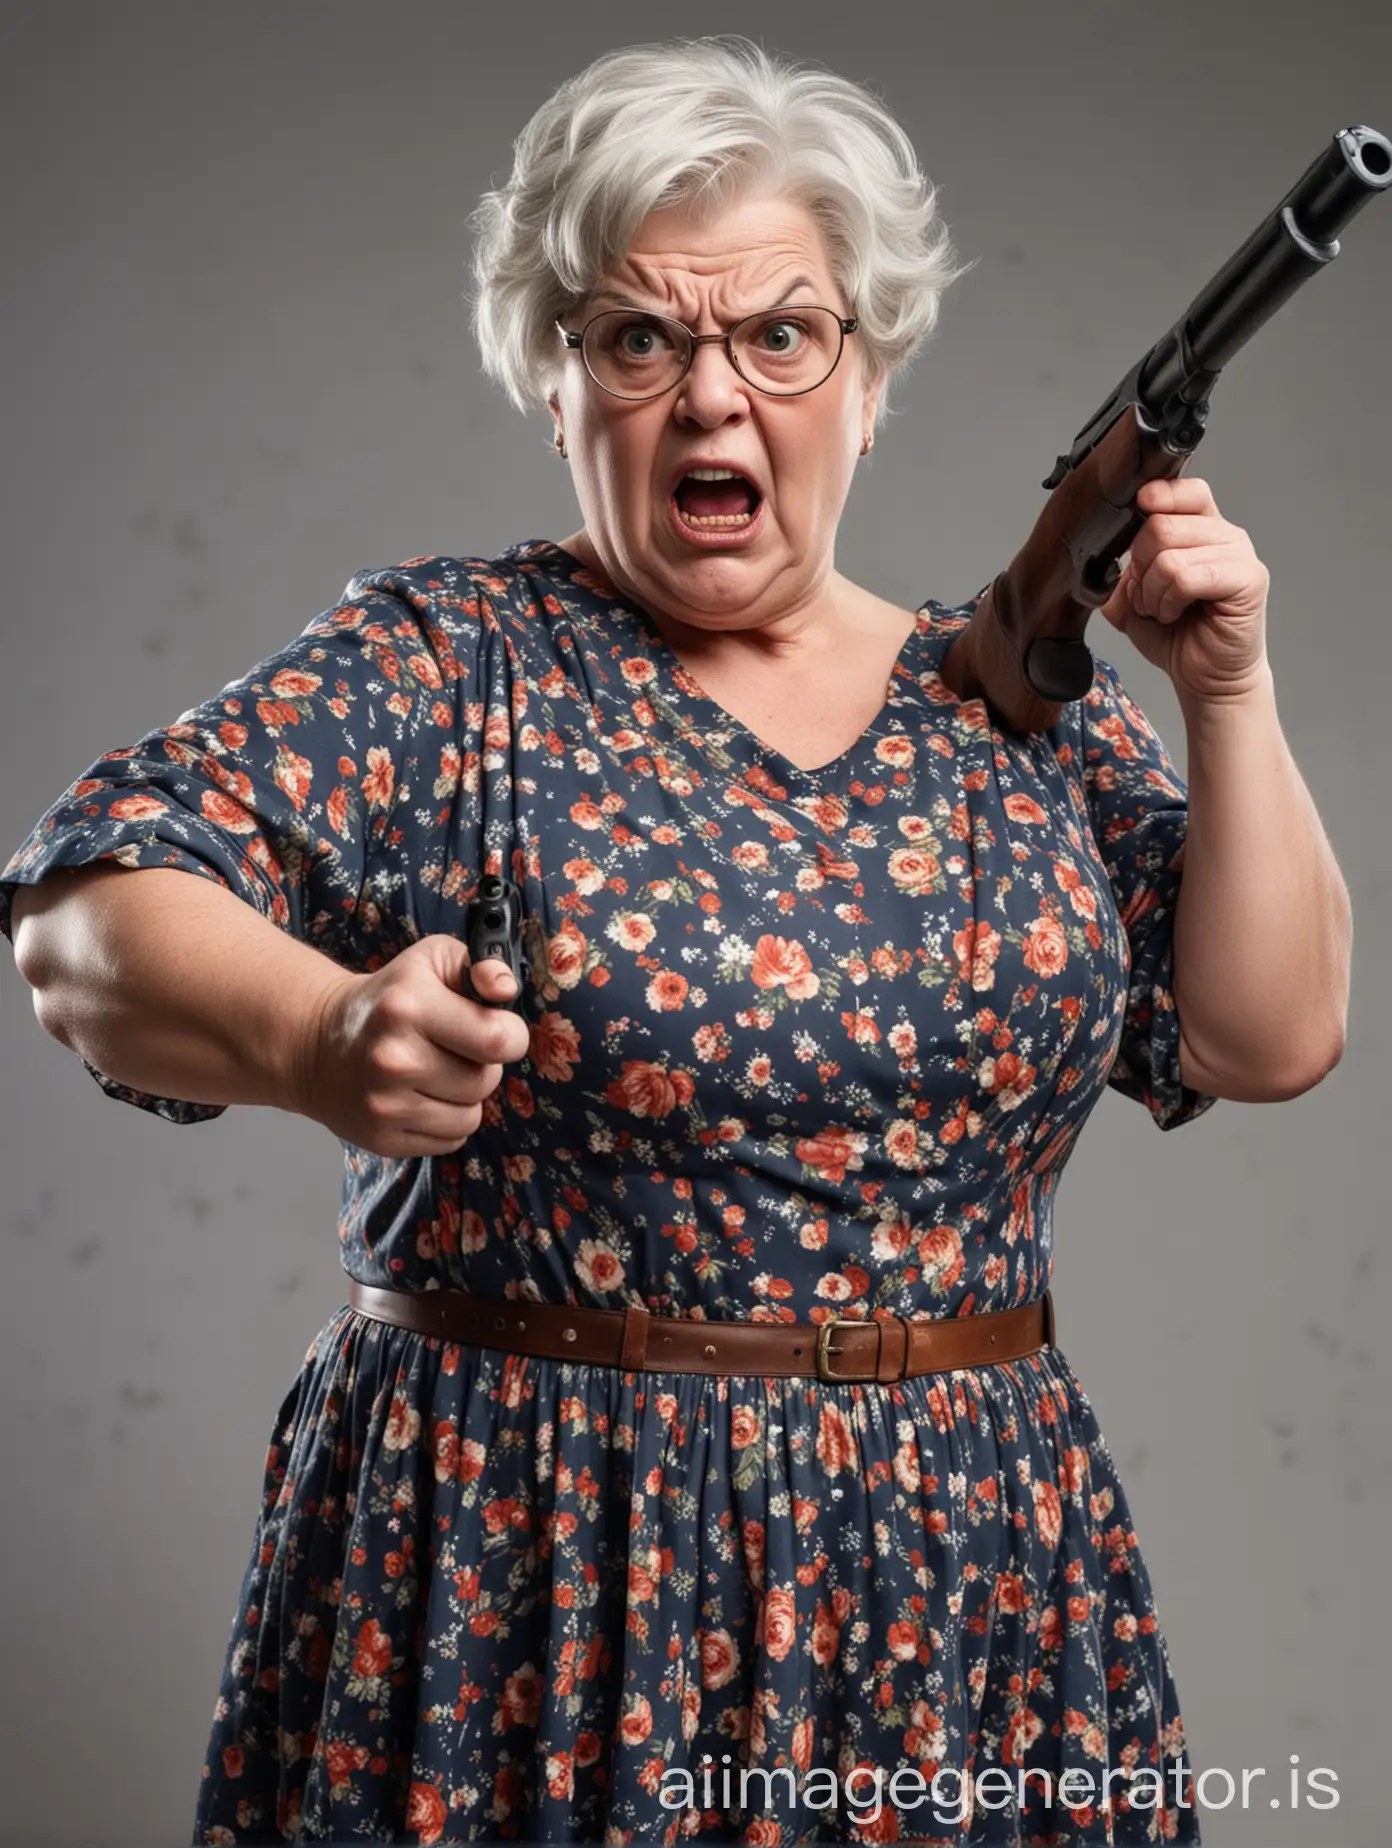 Angry-Old-Woman-in-Dress-Pointing-Shotgun